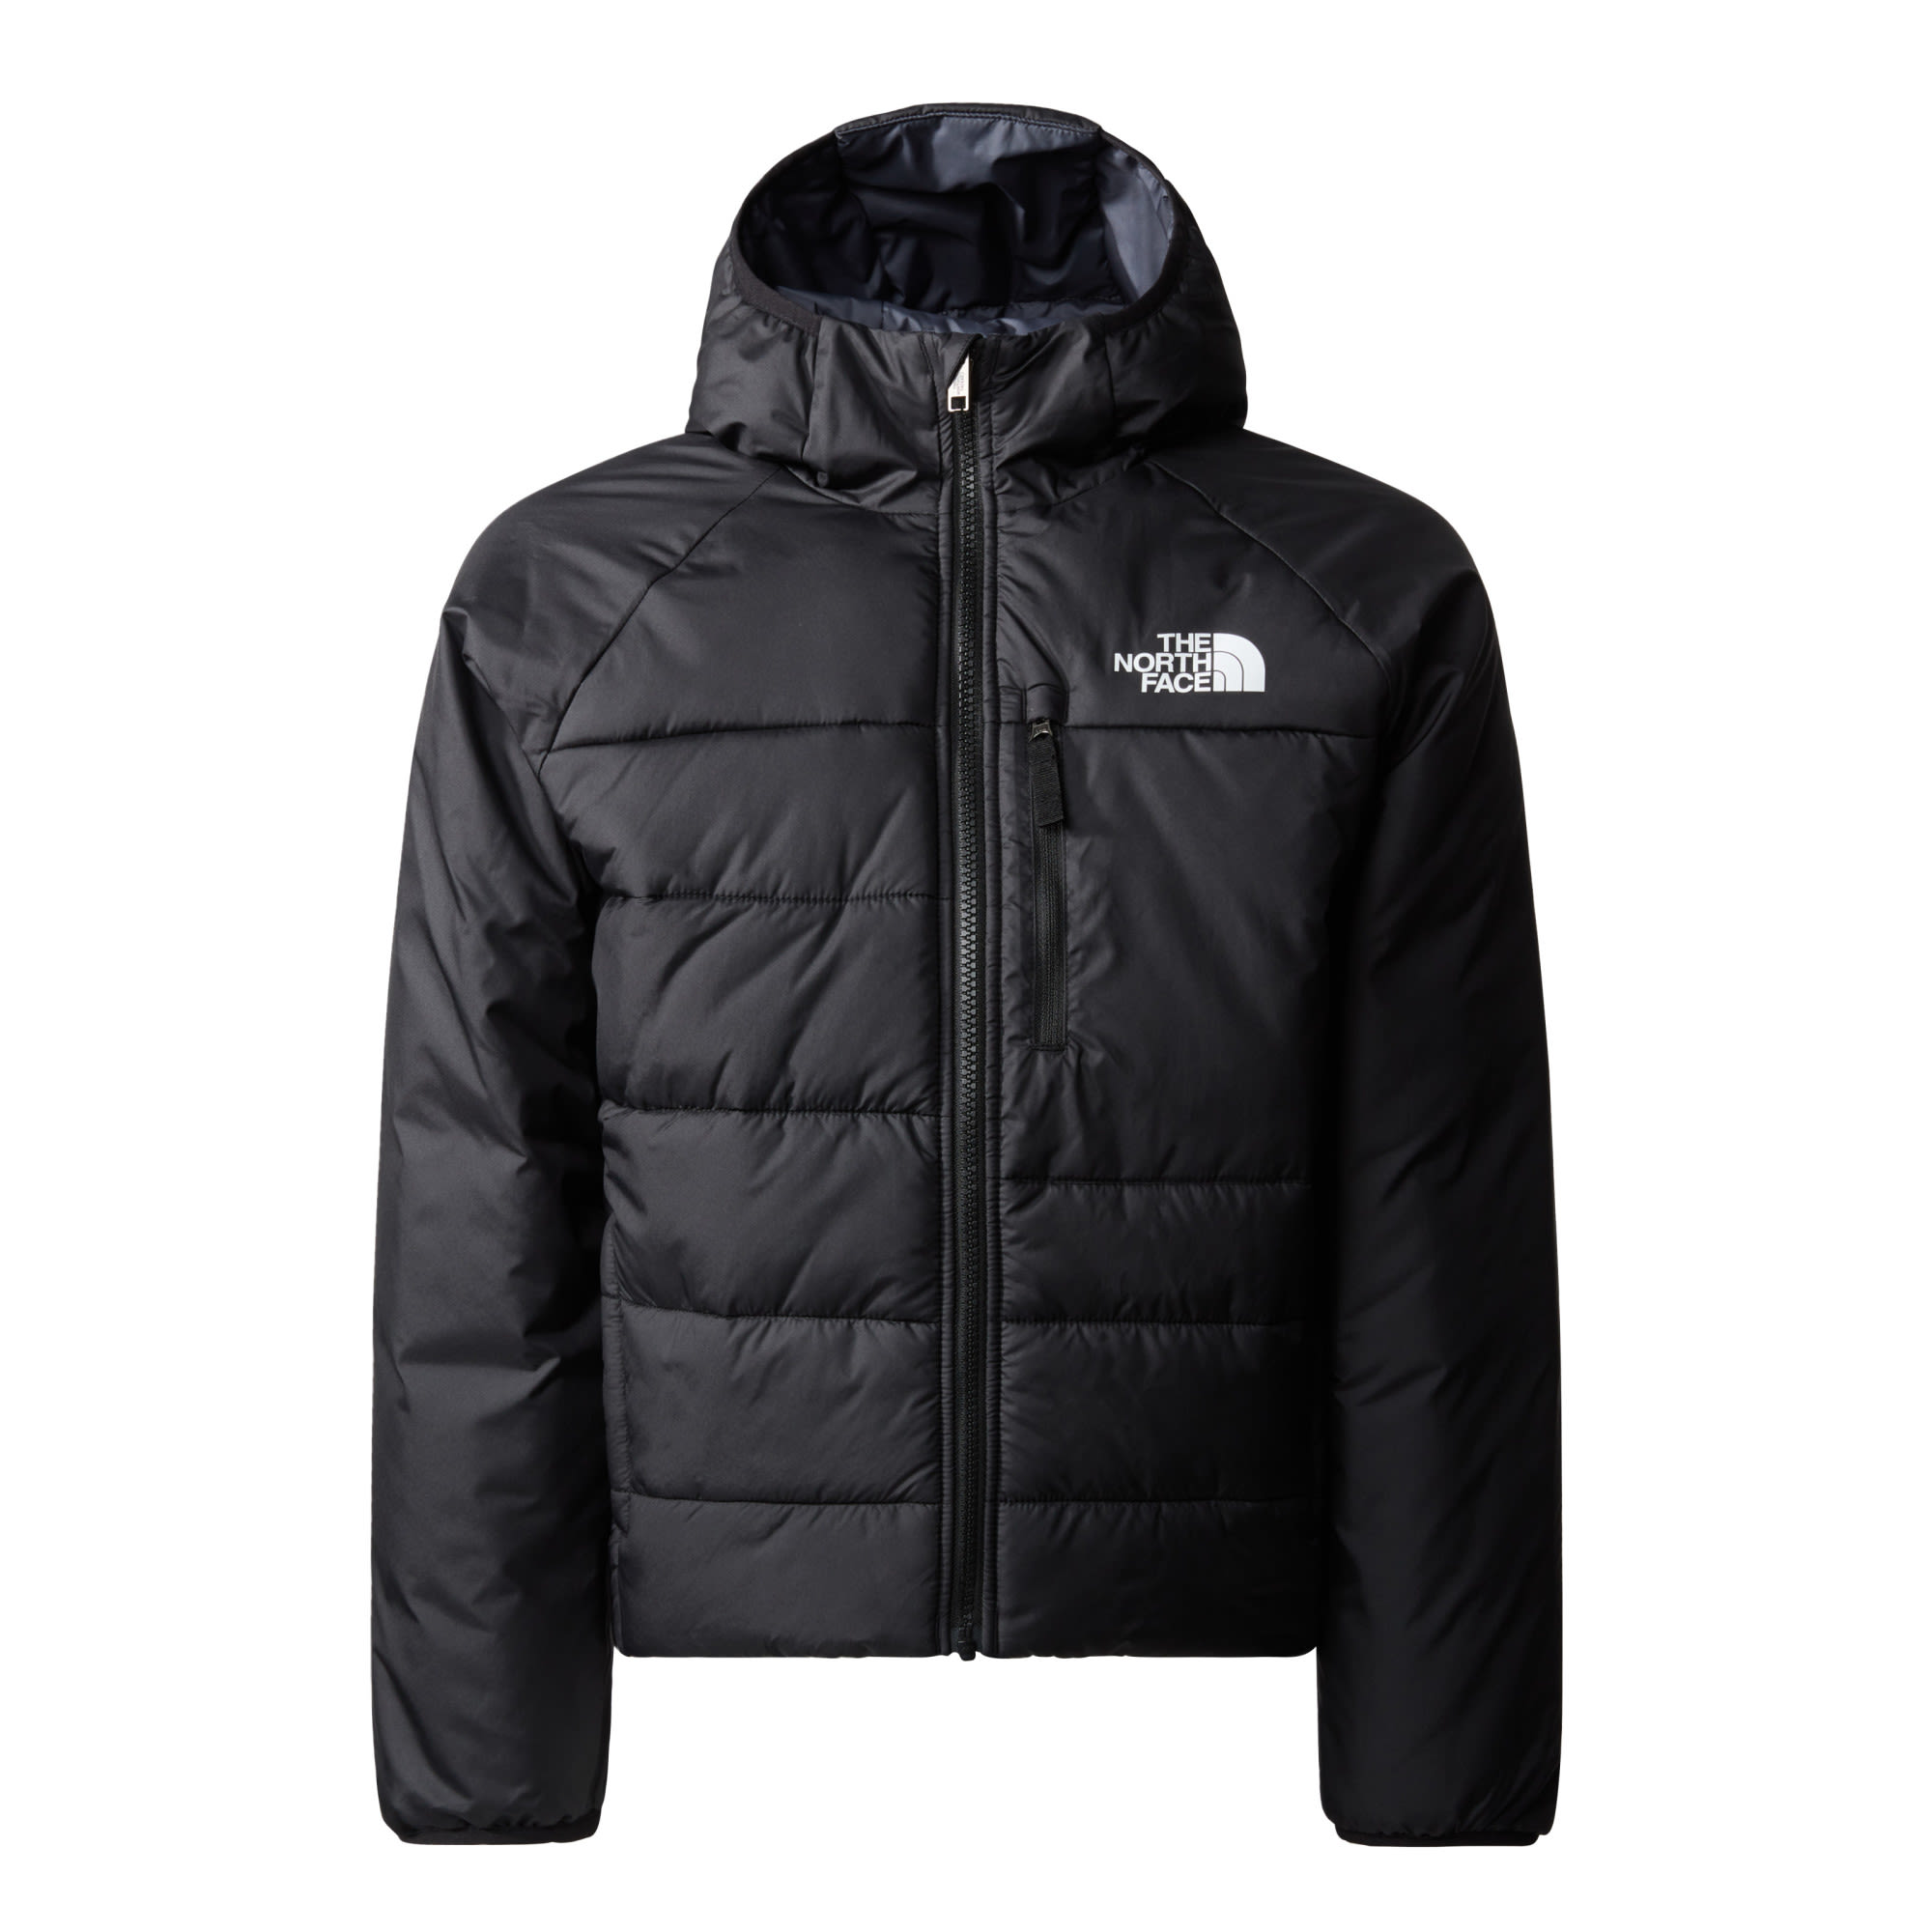 The North Face Boys Perrito Reversible Jacket Schwarz | Größe XS | Jungen Anor